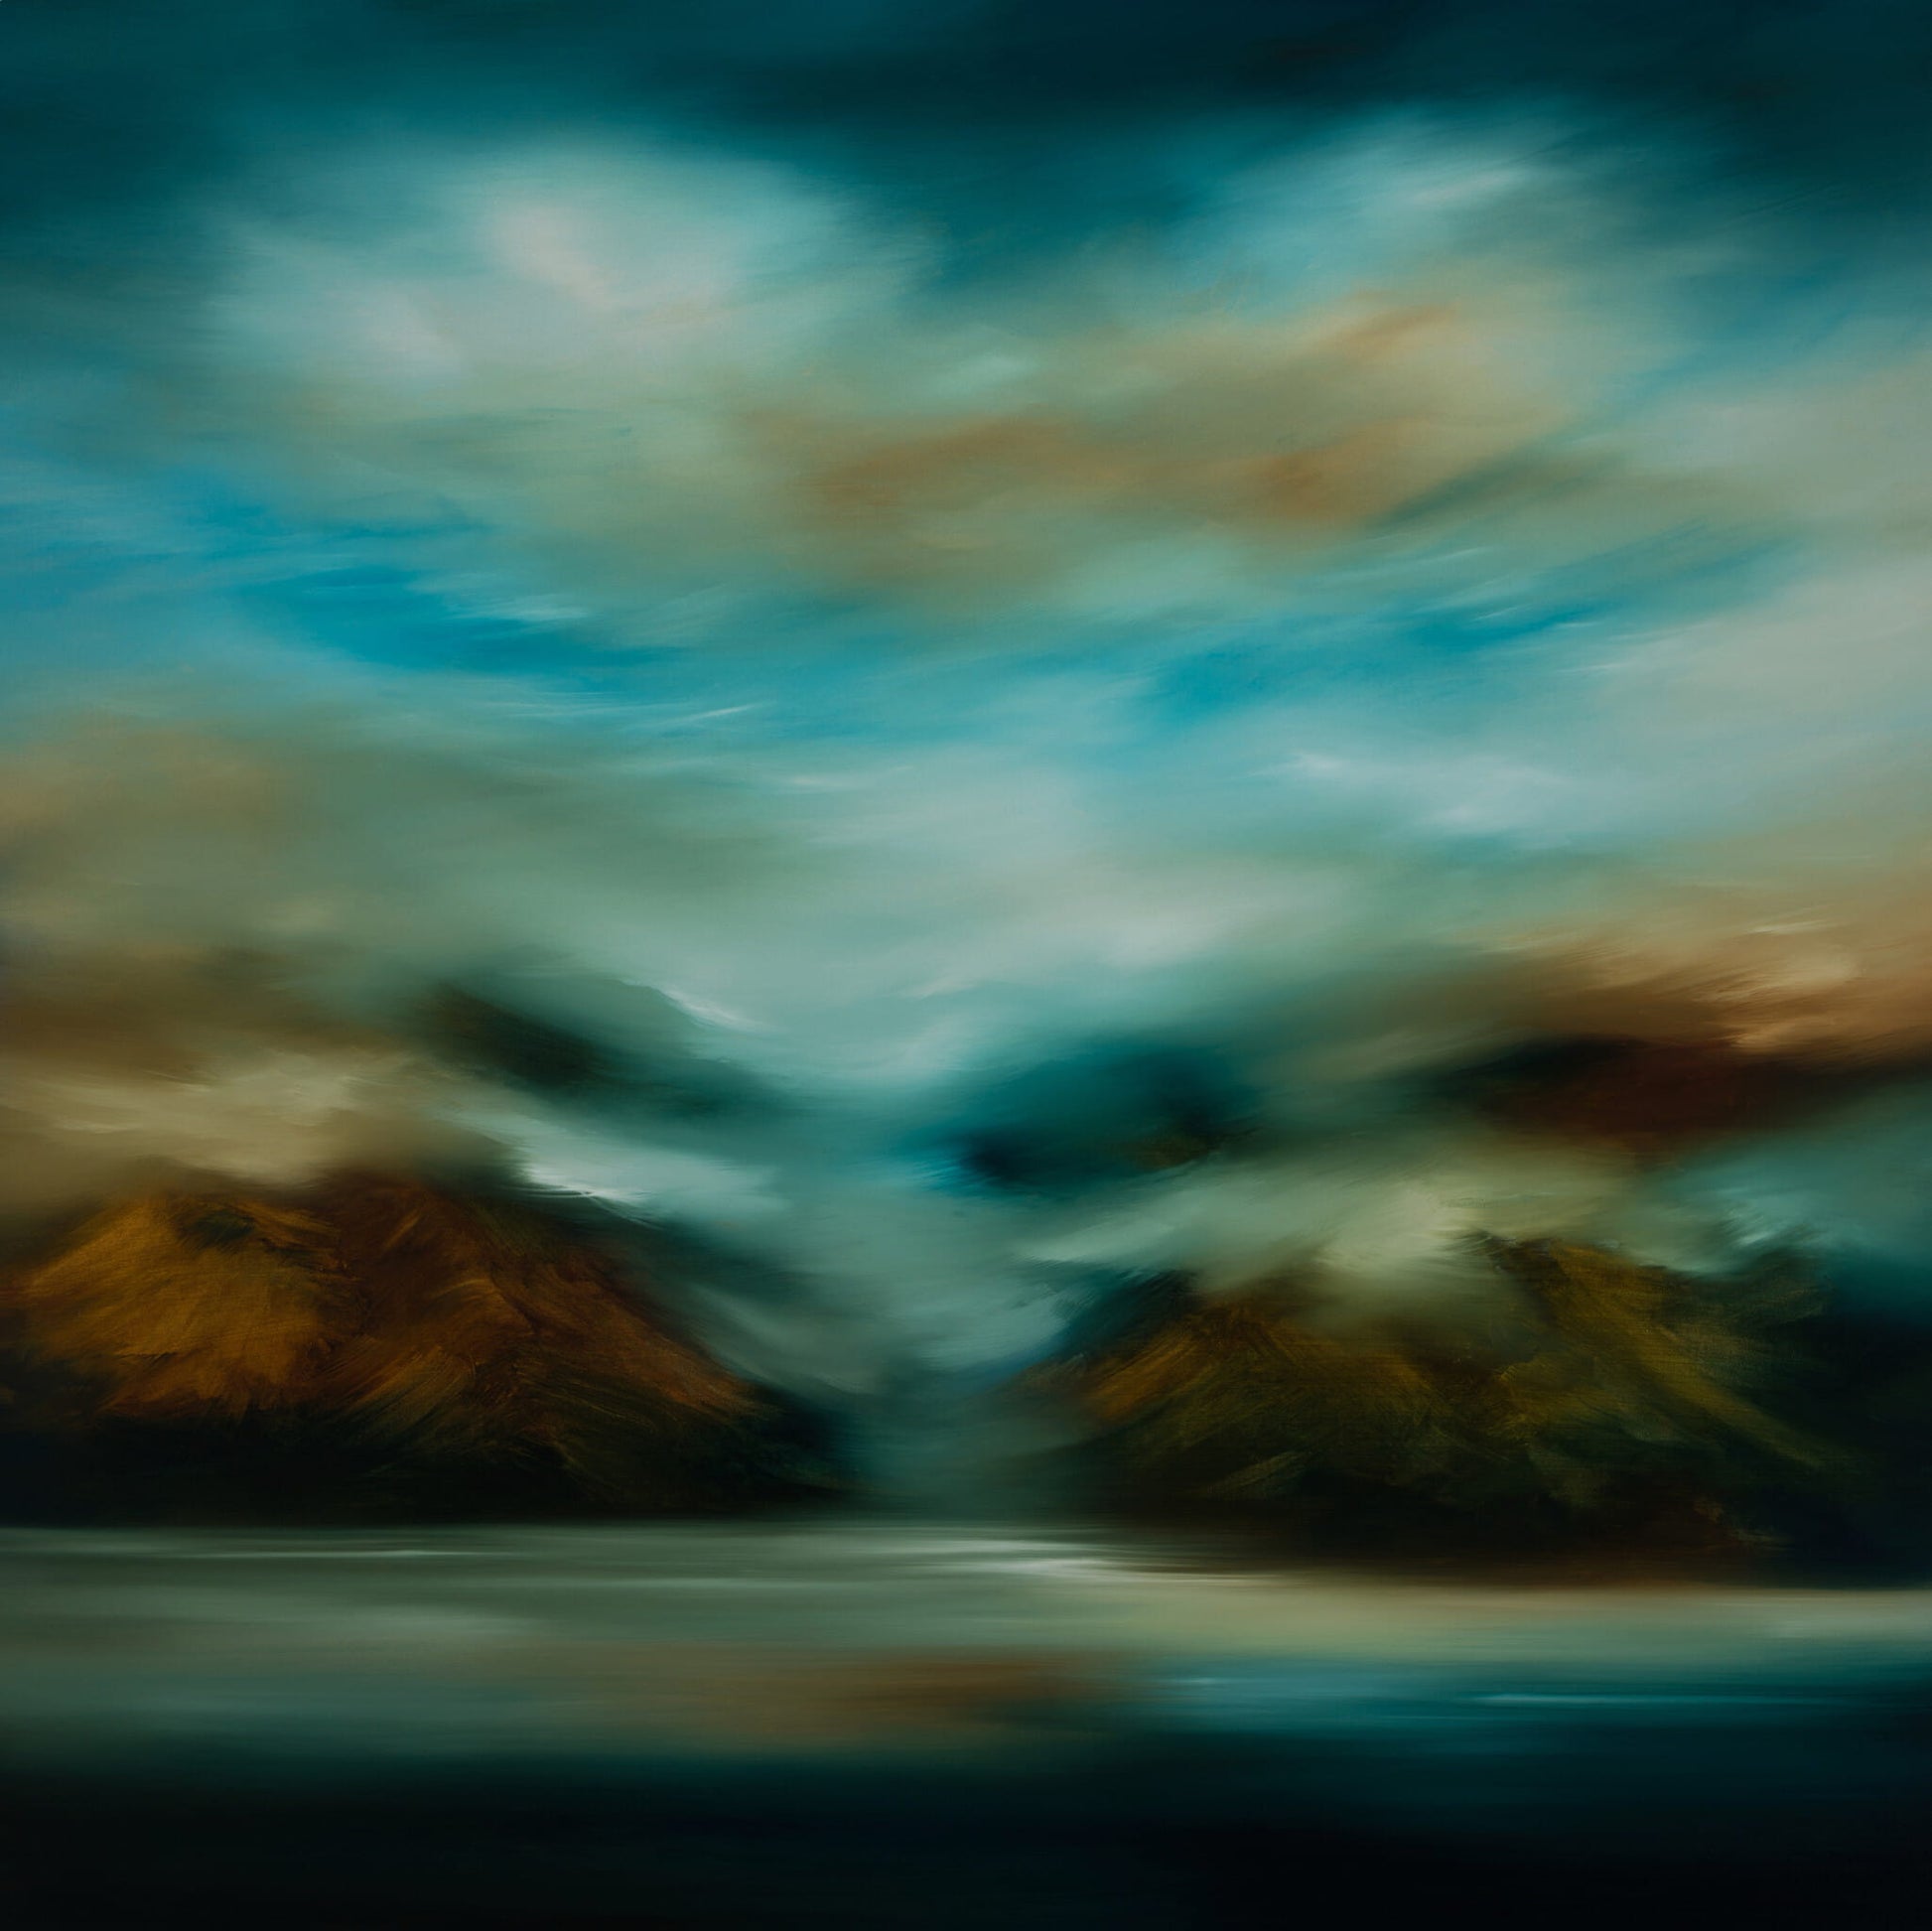 Abstract landscape in blue and tones of brown and gold